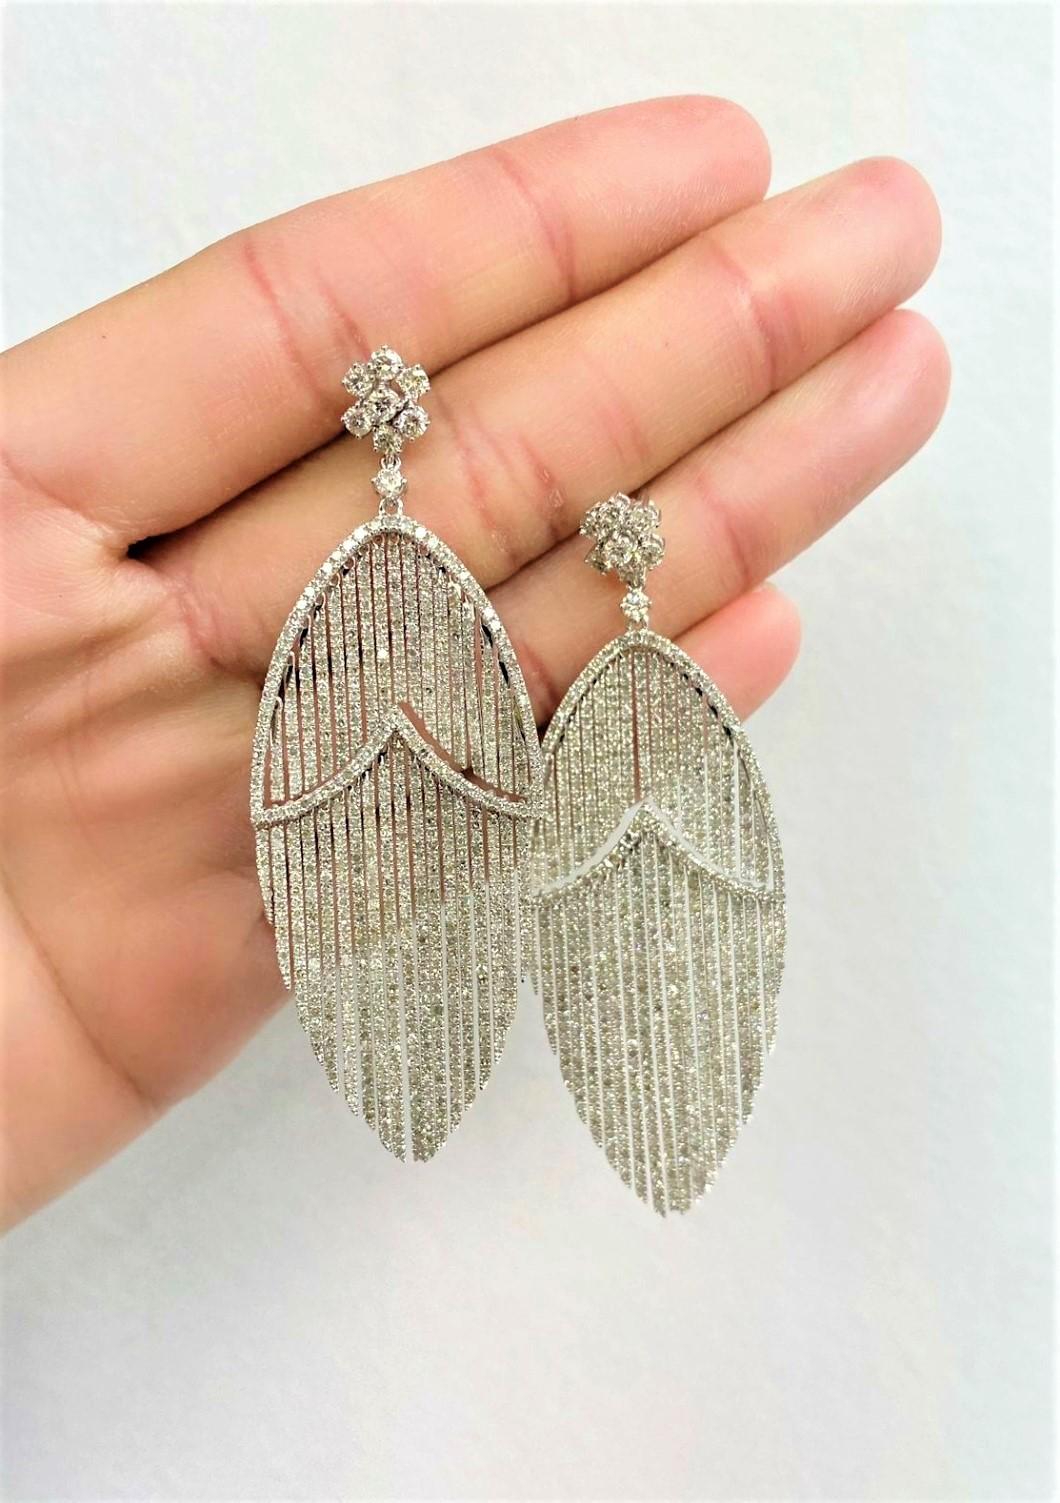 The Following Items we are offering is a Rare Important Radiant 18KT Gold Glamorous and Elaborate Rare Magnificent Glittering Diamond Fringe Design Earrings. Earrings feature OVER 14,000 RARE HANDSET SPARKLING DIAMONDS set in 18KT GOLD! T.C.W.